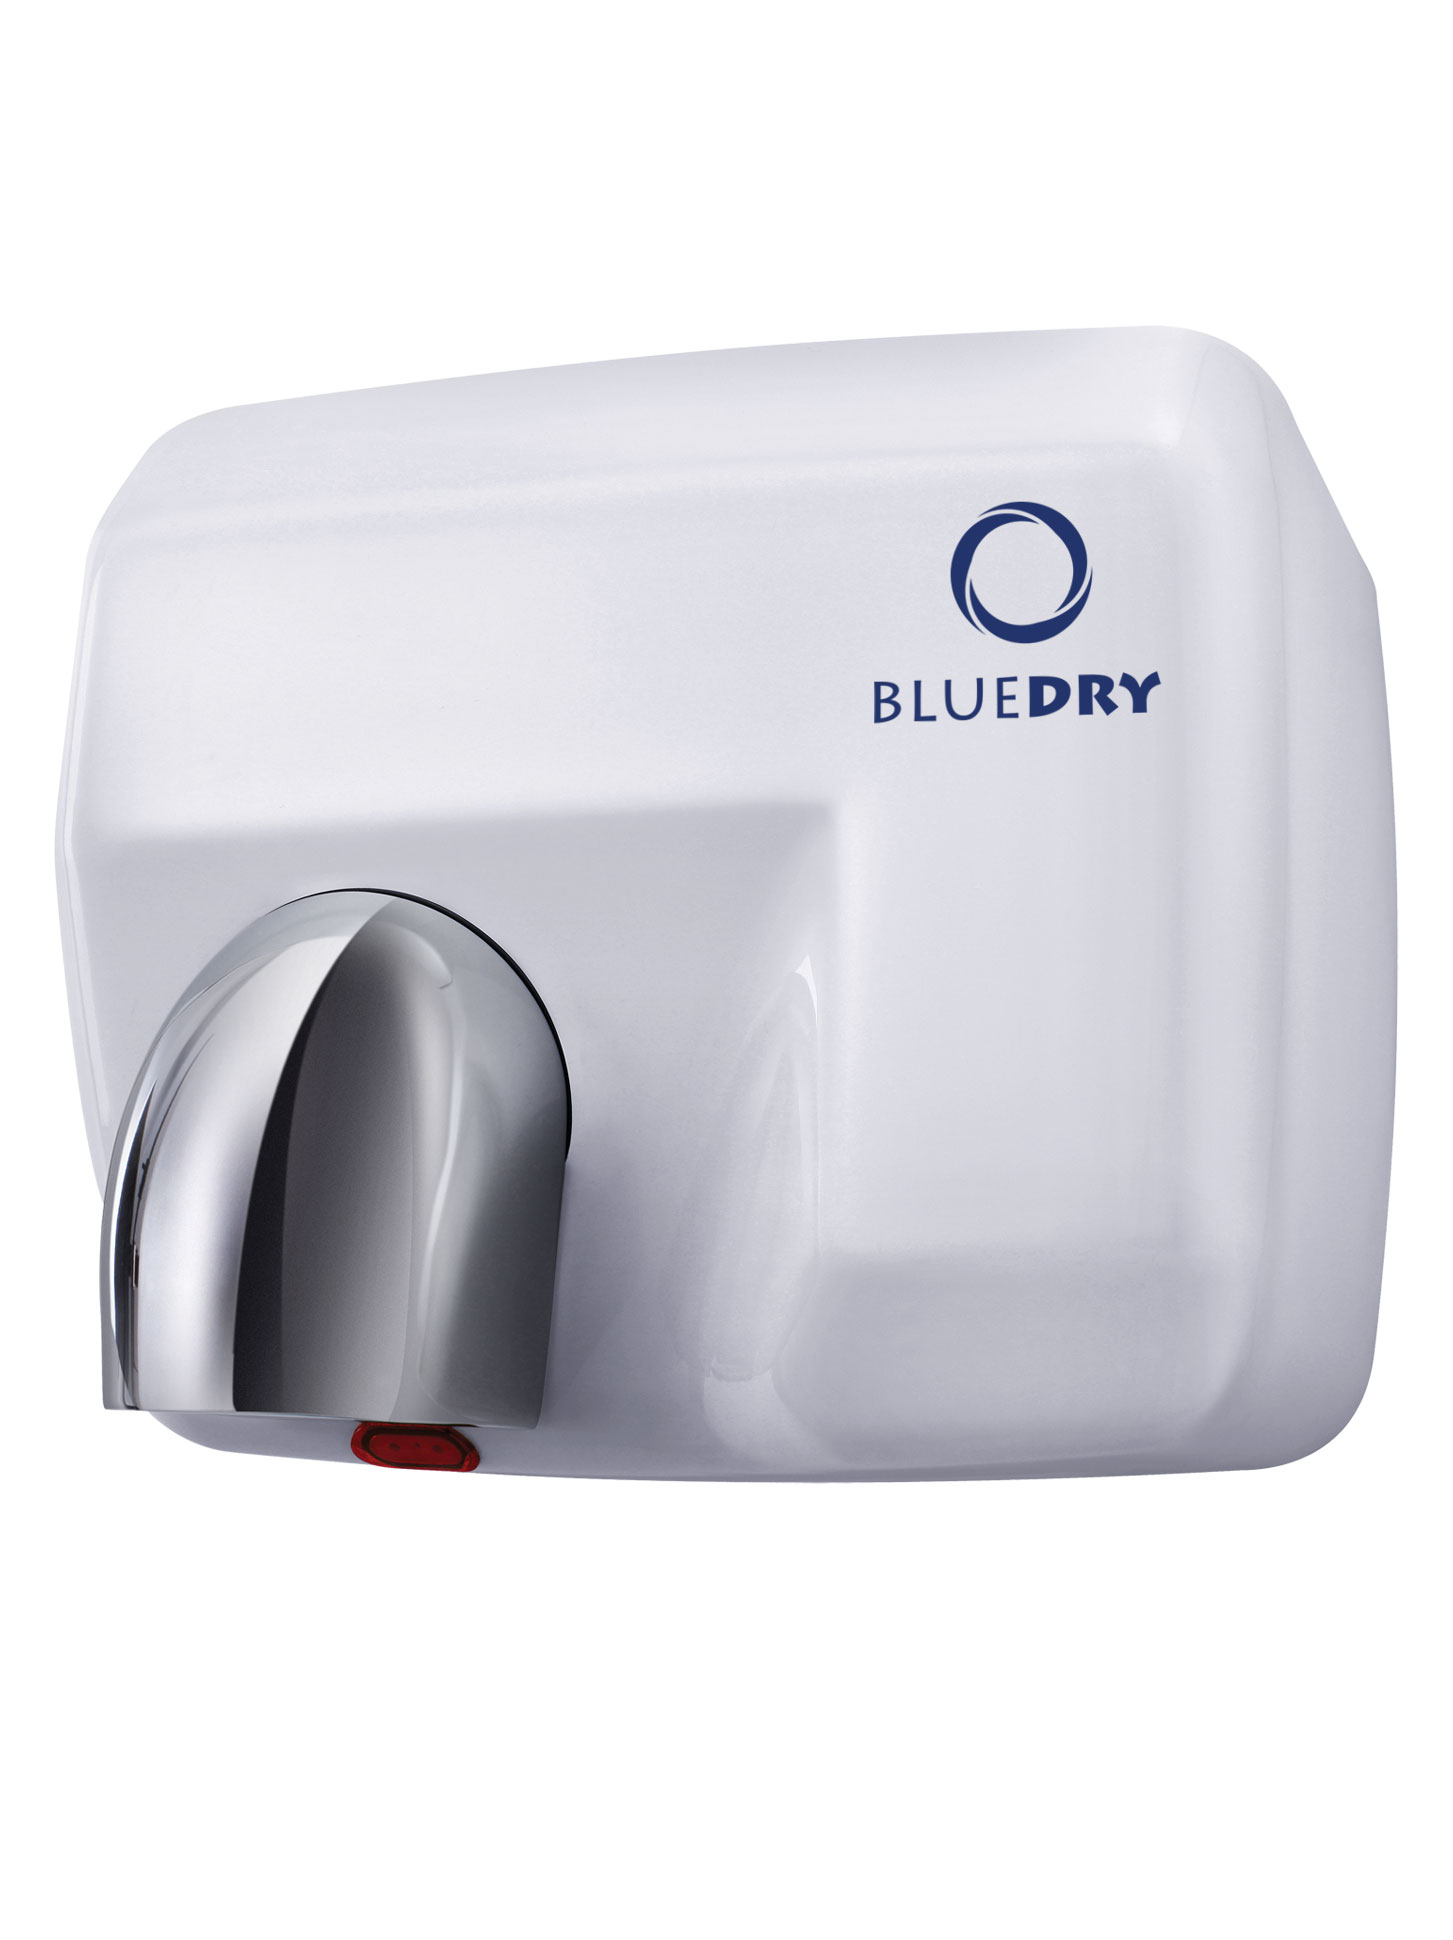 BLUE DRY STORM HD-BD1004 NOZZLE HAND DRYER AIR ECO FAST LED DRYERS DRIER BLUEDRY